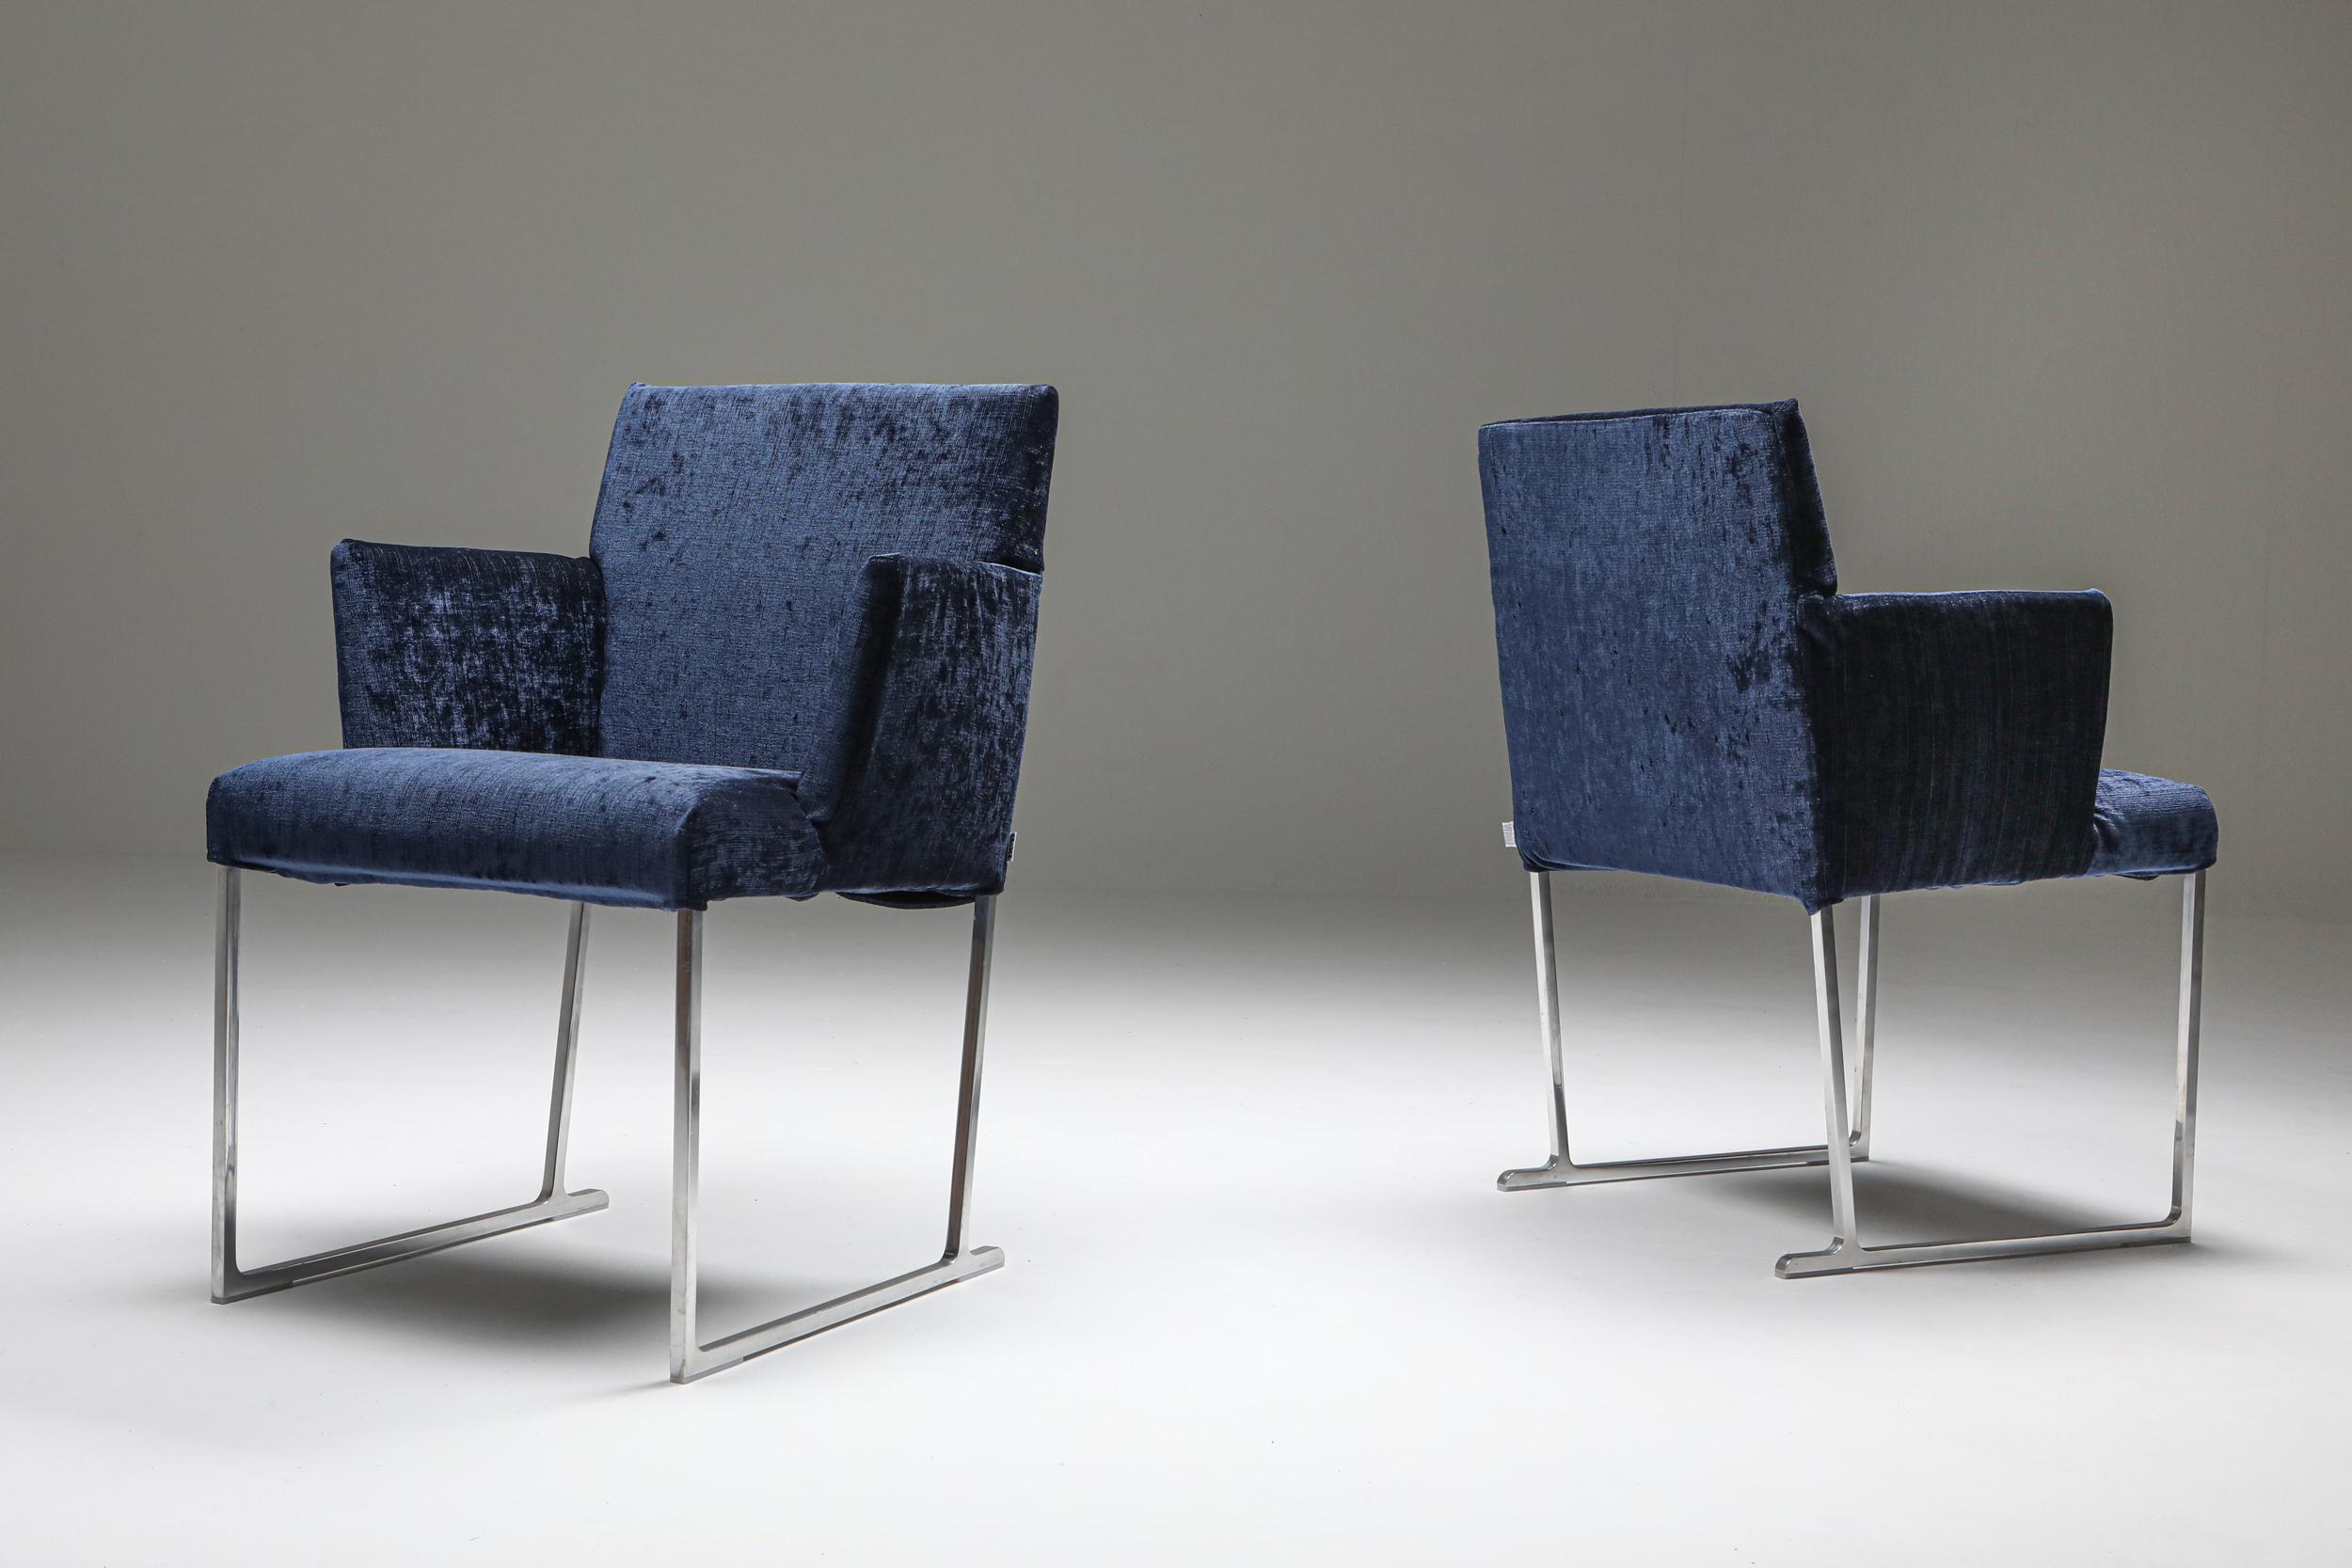 Solo Chairs by Antonio Citterio for B&B Italia, Italy, 2000s In Excellent Condition For Sale In Antwerp, BE